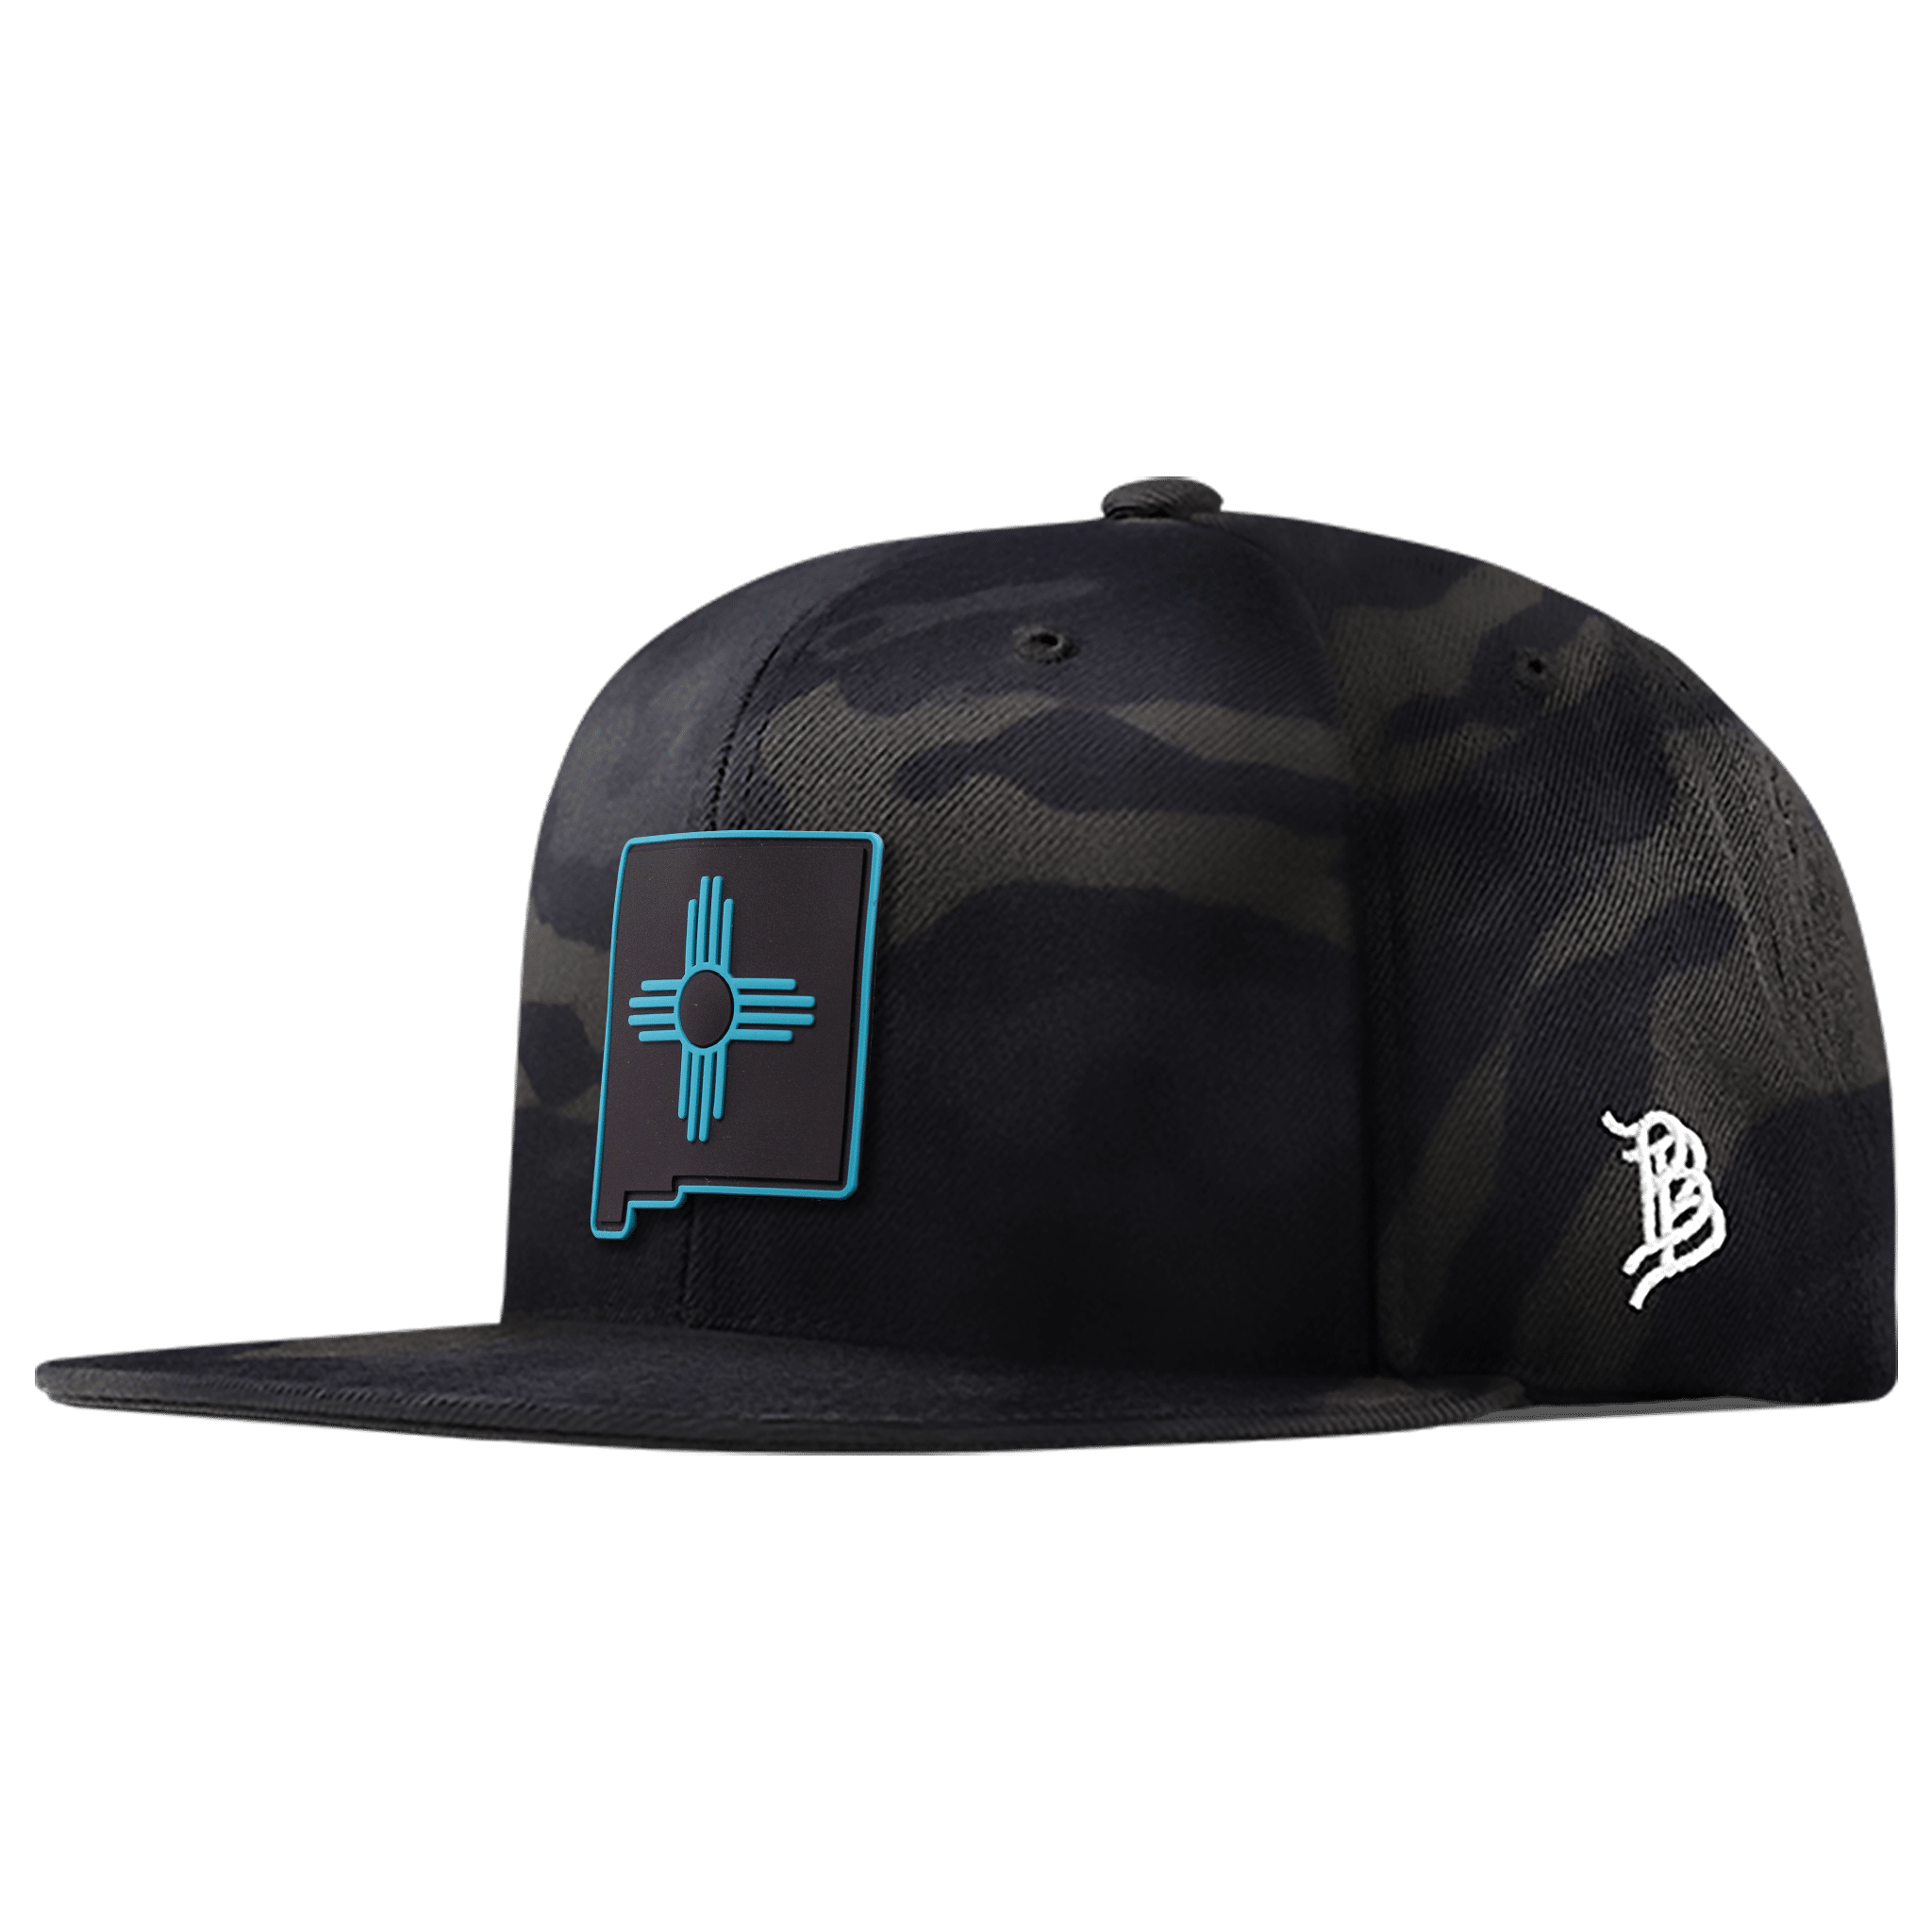 New Mexico Turquoise Classic Snapback